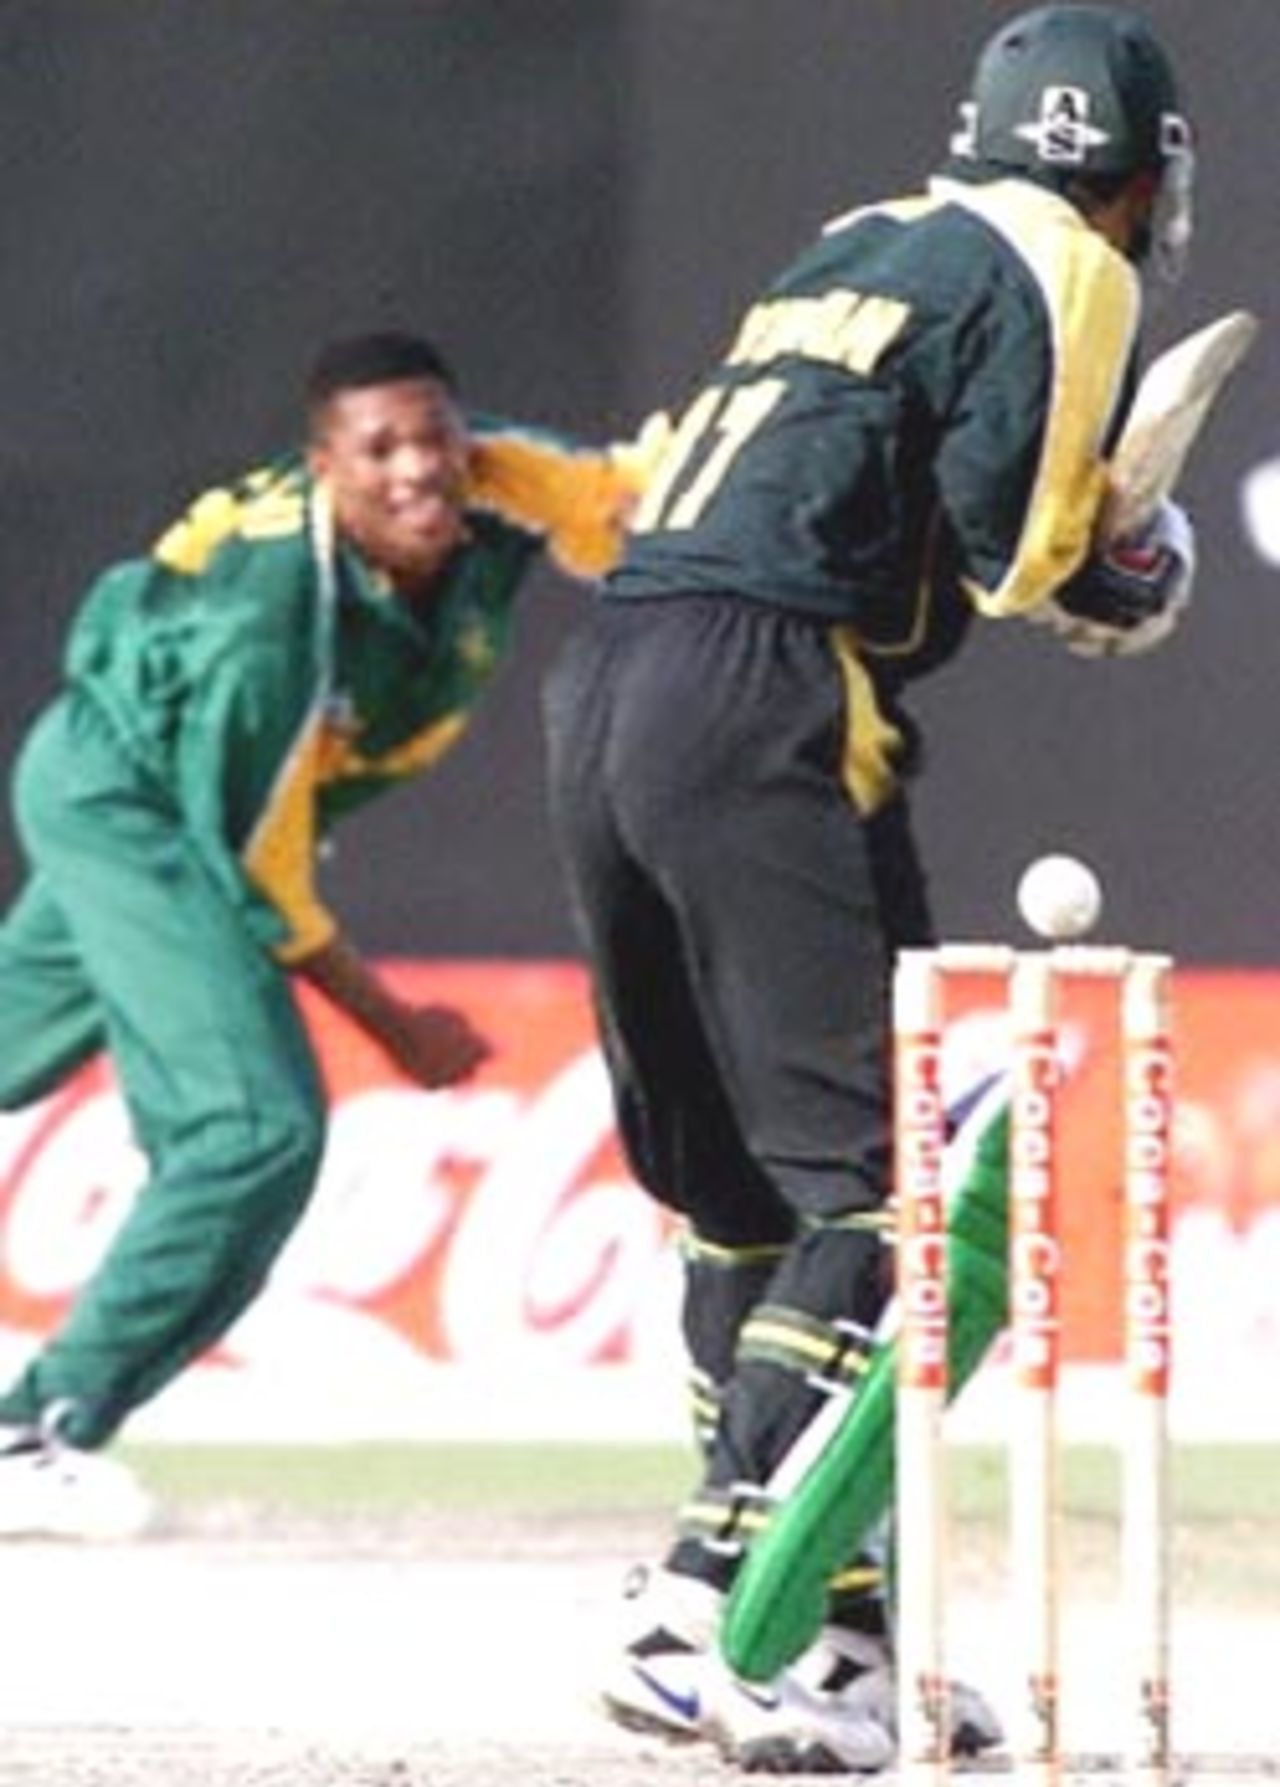 Pakistani batsman Imran Nazir (R) in action against South African bowler Makhaya Ntini during the Champions Cup international at the Sharjah cricket stadium 24 March 2000.